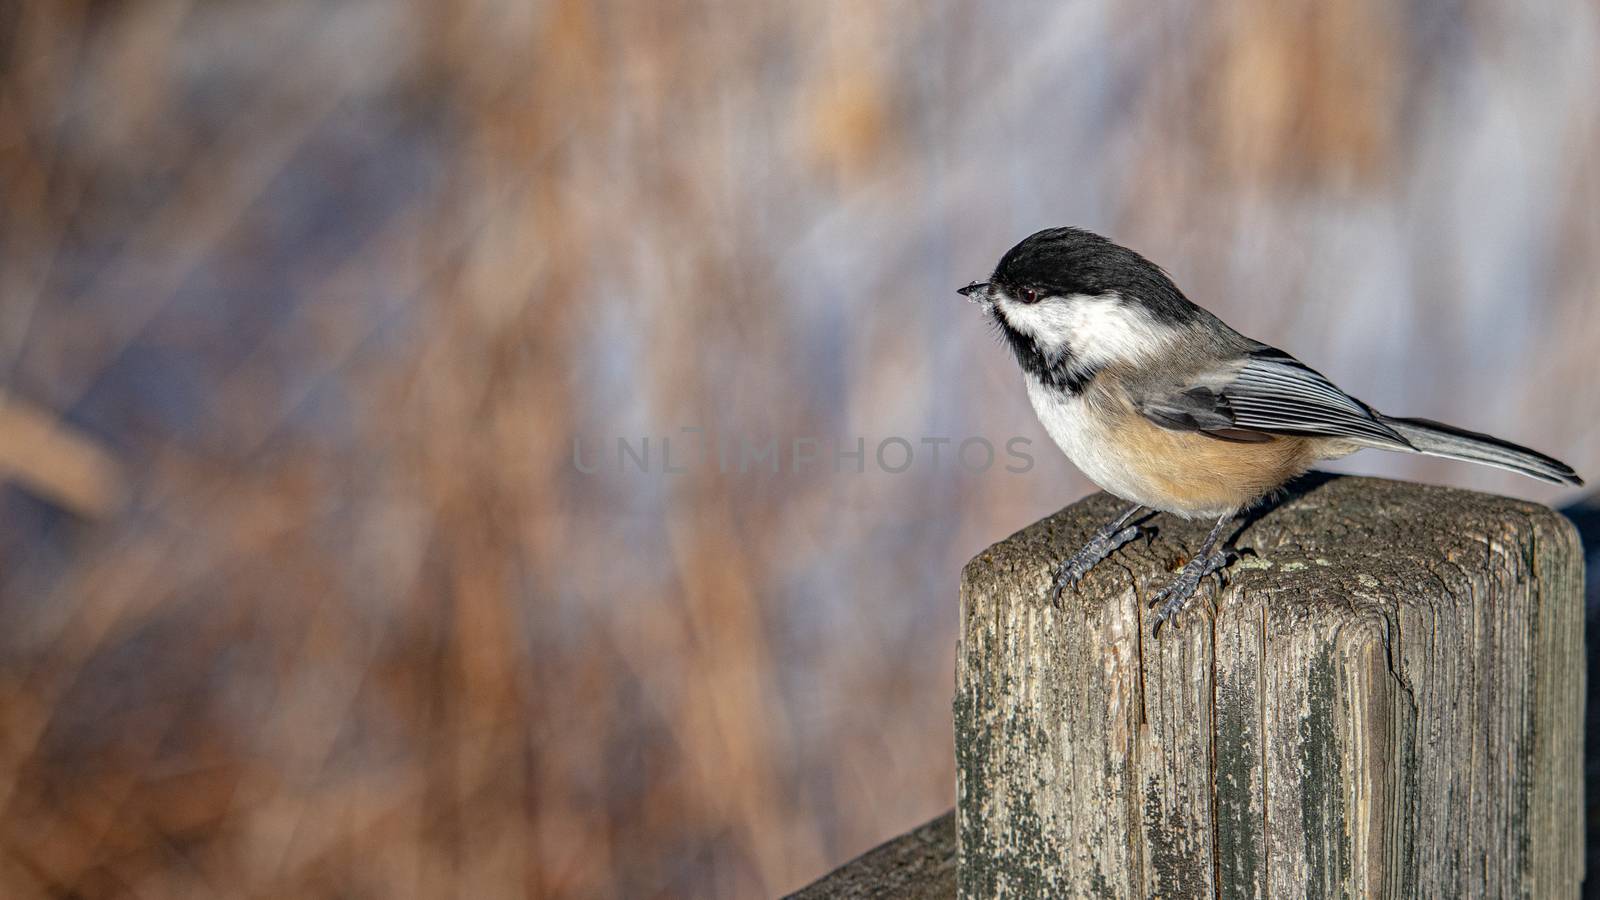 Black-Capped Chickadee on a Wooden Fencepost by colintemple